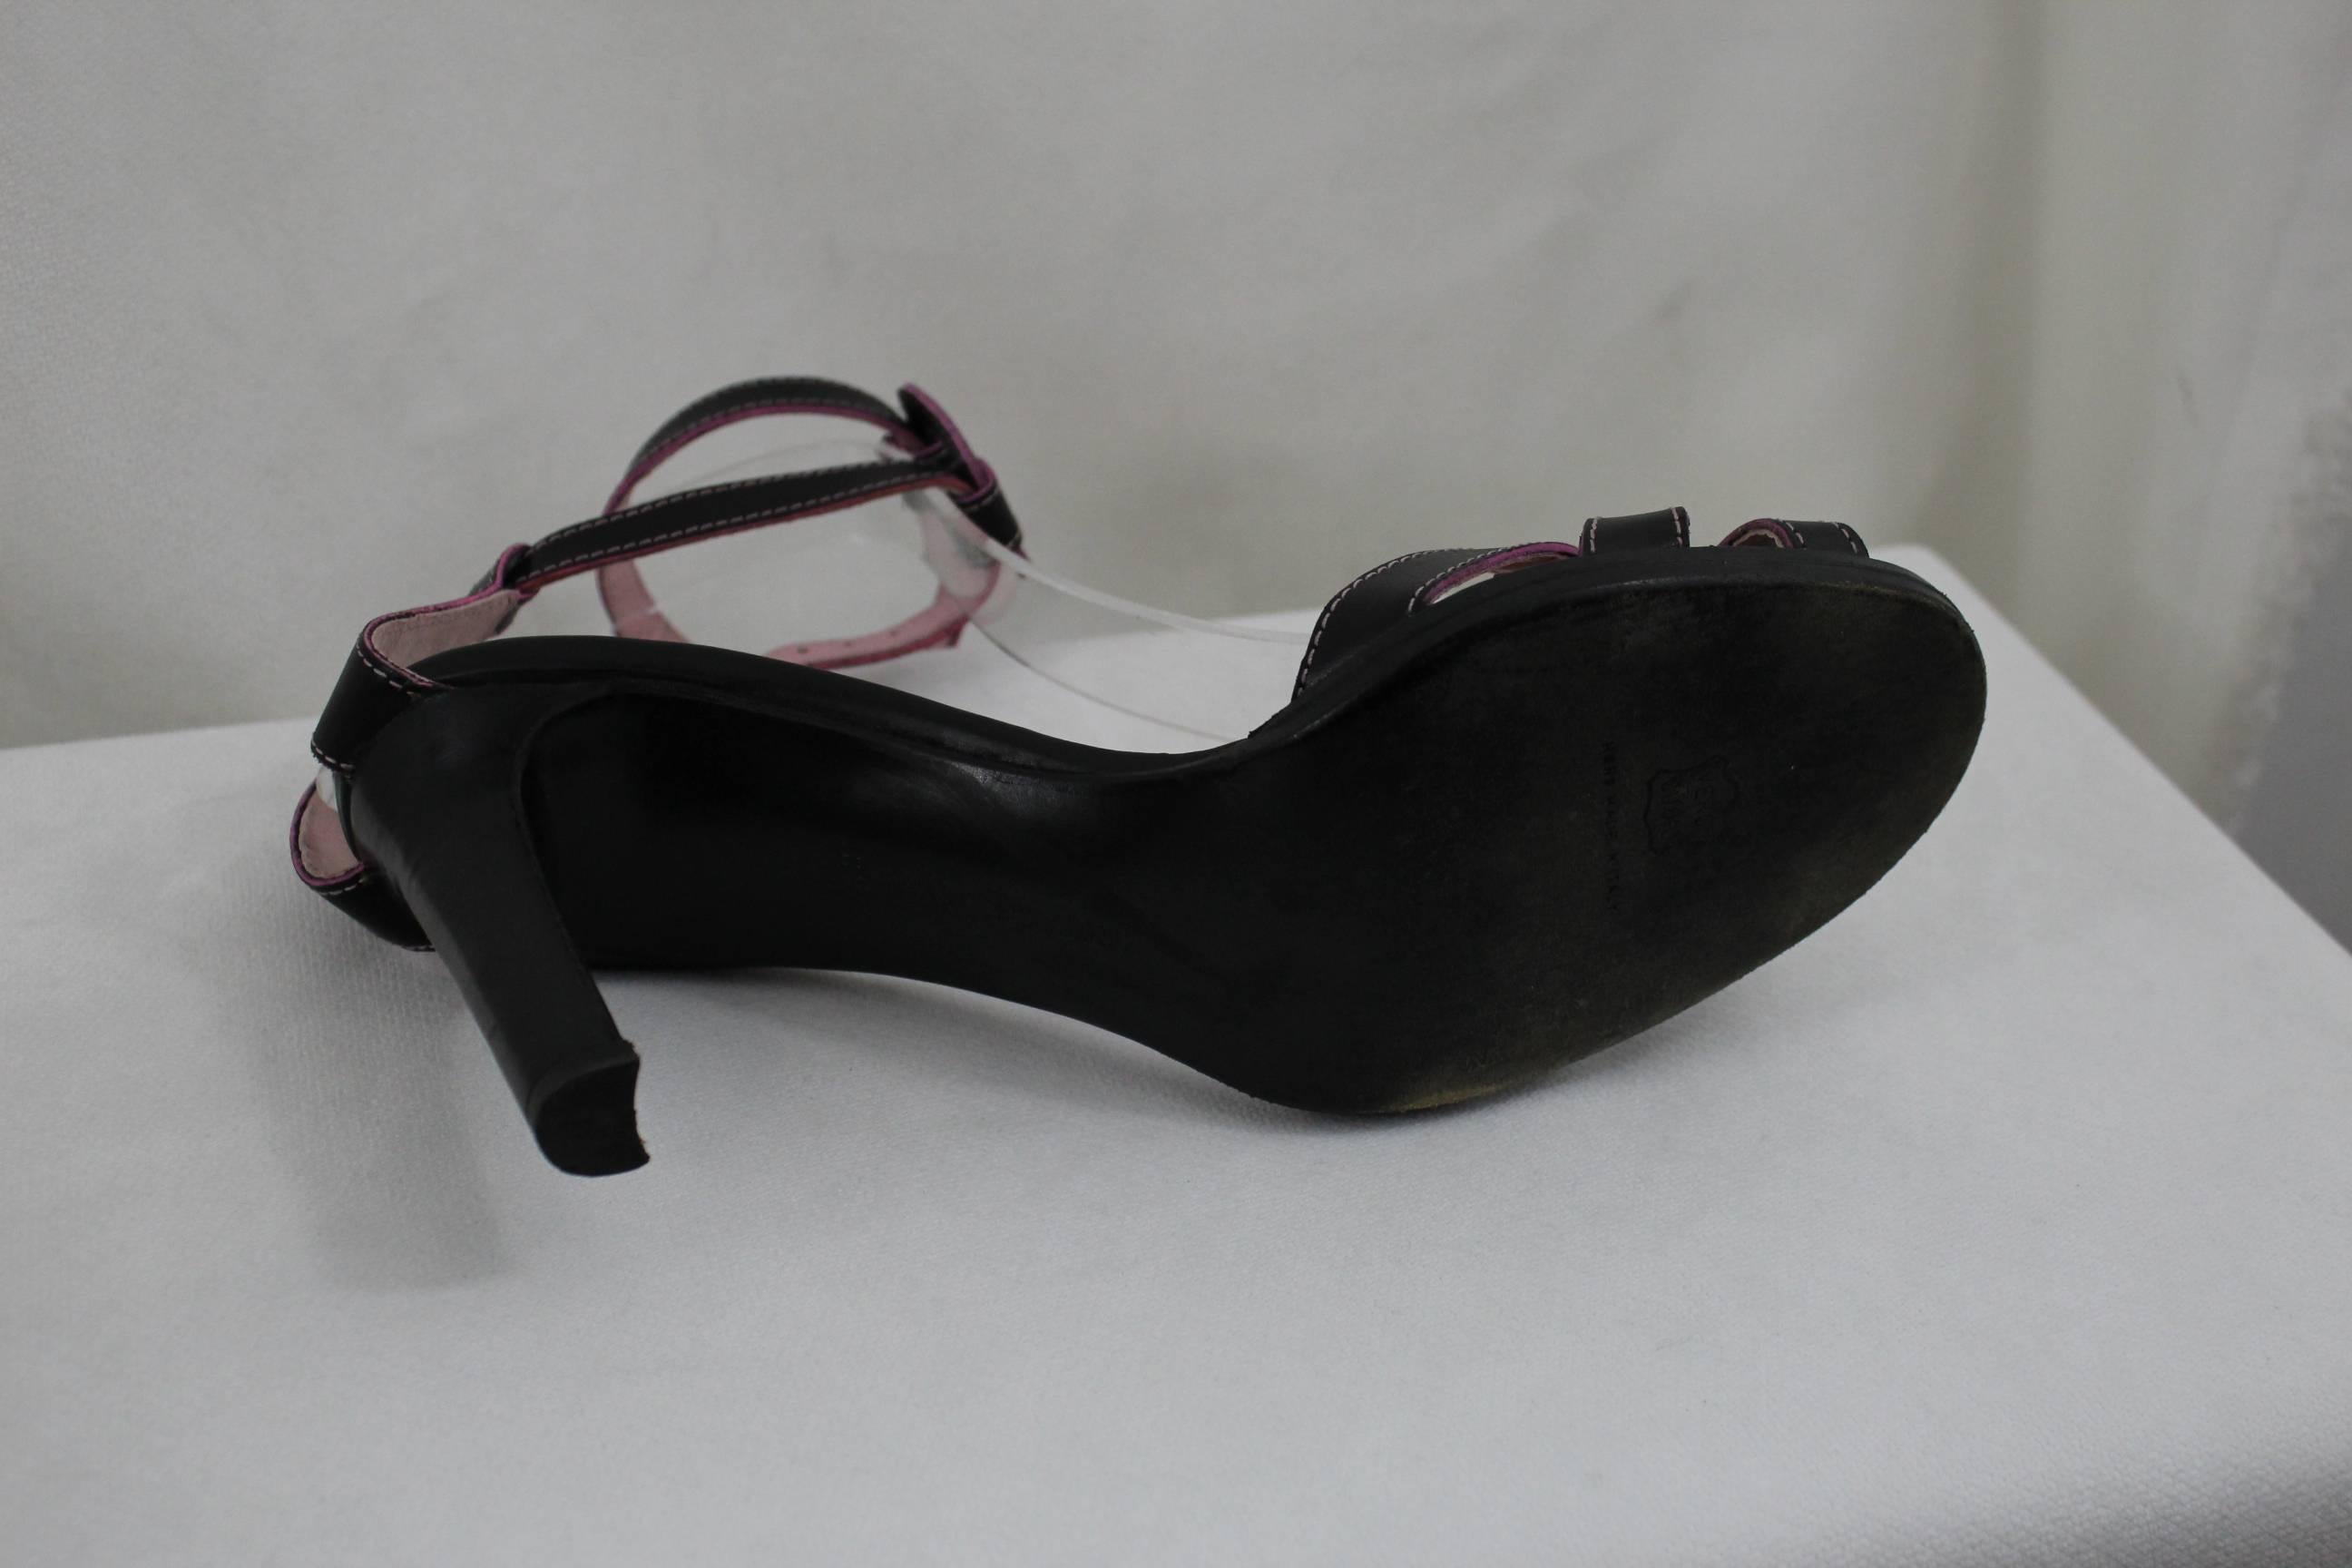 Nice pair of sandals from manolo Blahnk in pink and blakc leather

Heel 3,5 inches

Good condition